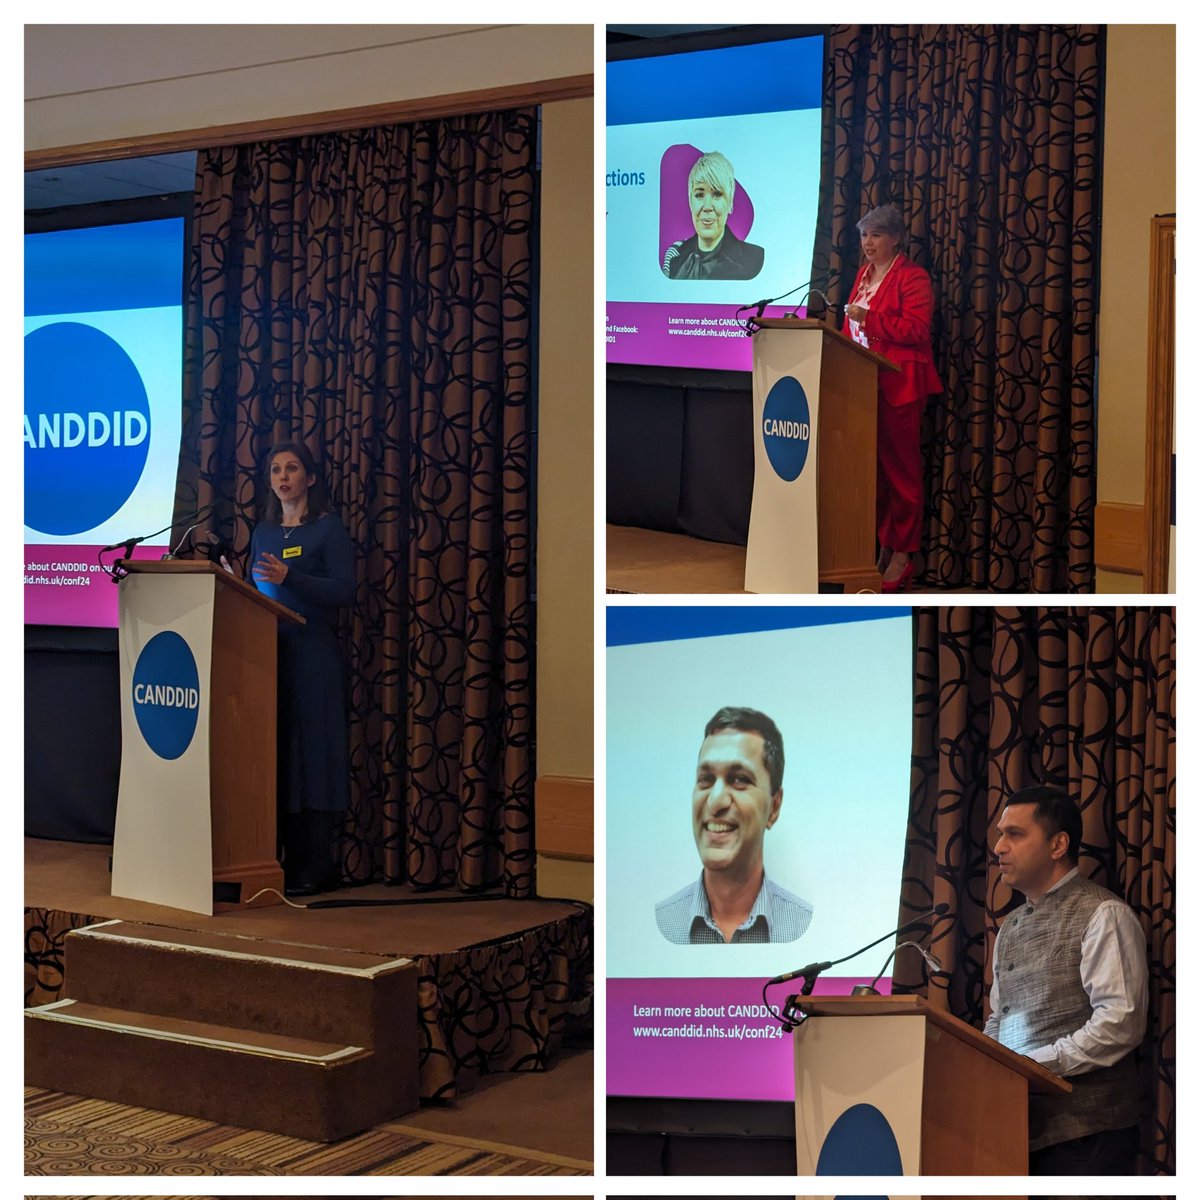 Thank you to @MaddyLowry2 @IslaWilsonCWP and @modiyoor for getting us started today at #CANDDIDConf24. Today's focus is: Meeting the needs of children and young people with neurodevelopmental conditions and their families. Learn more: canddid.nhs.uk